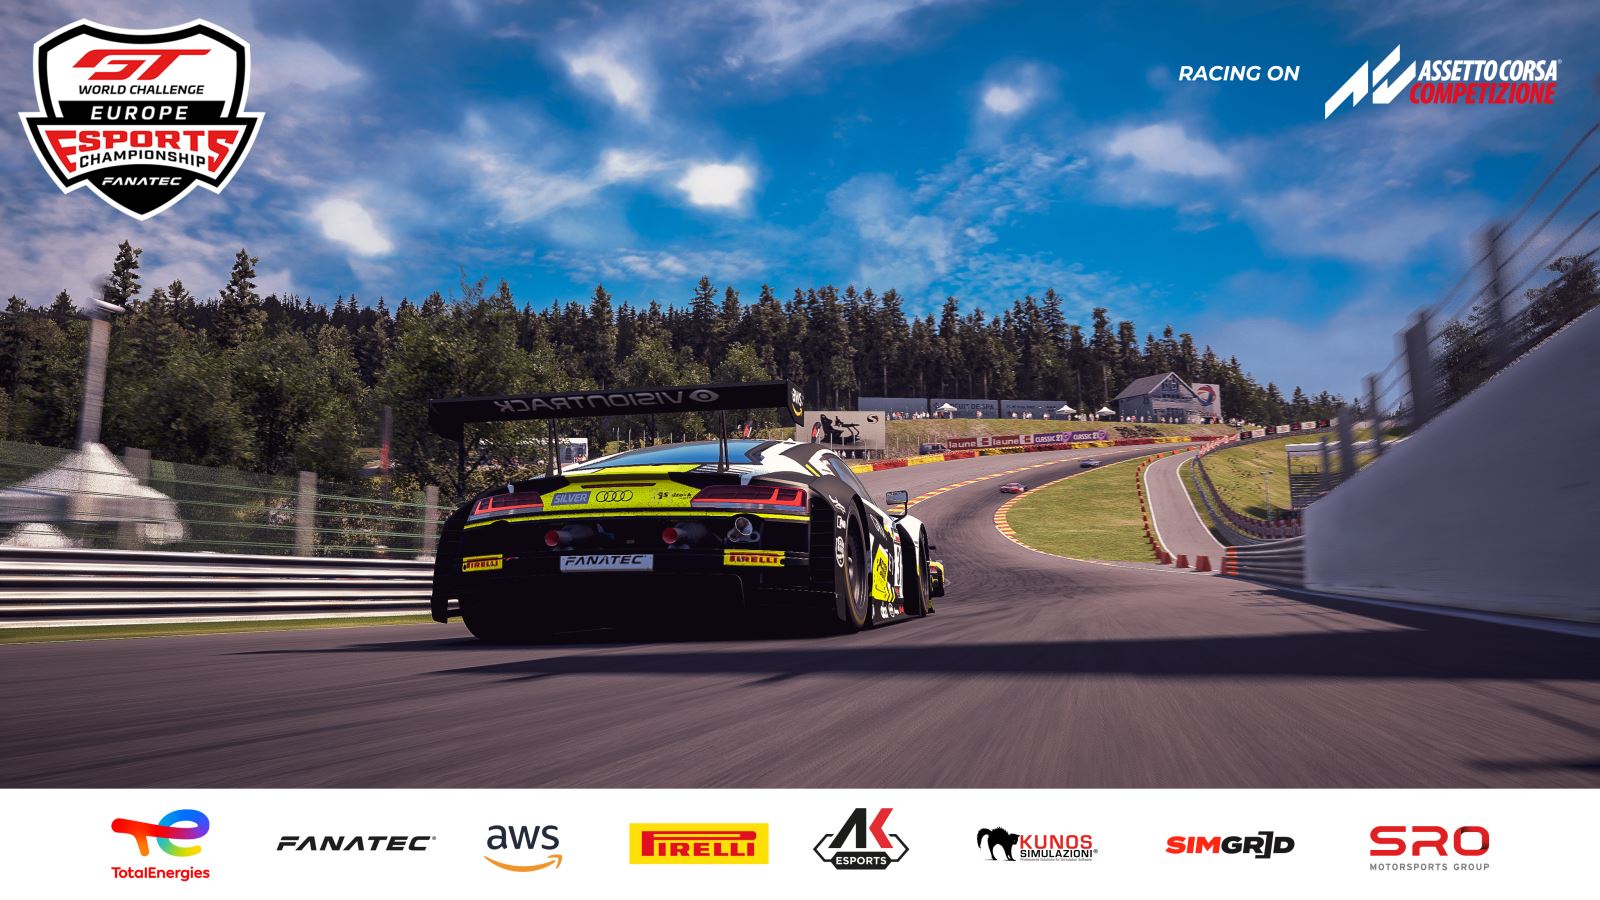 Ultimate test awaits Assetto Corsa Competizione racers as GT World Challenge Europe Esports gets set for 24 Hours of Spa